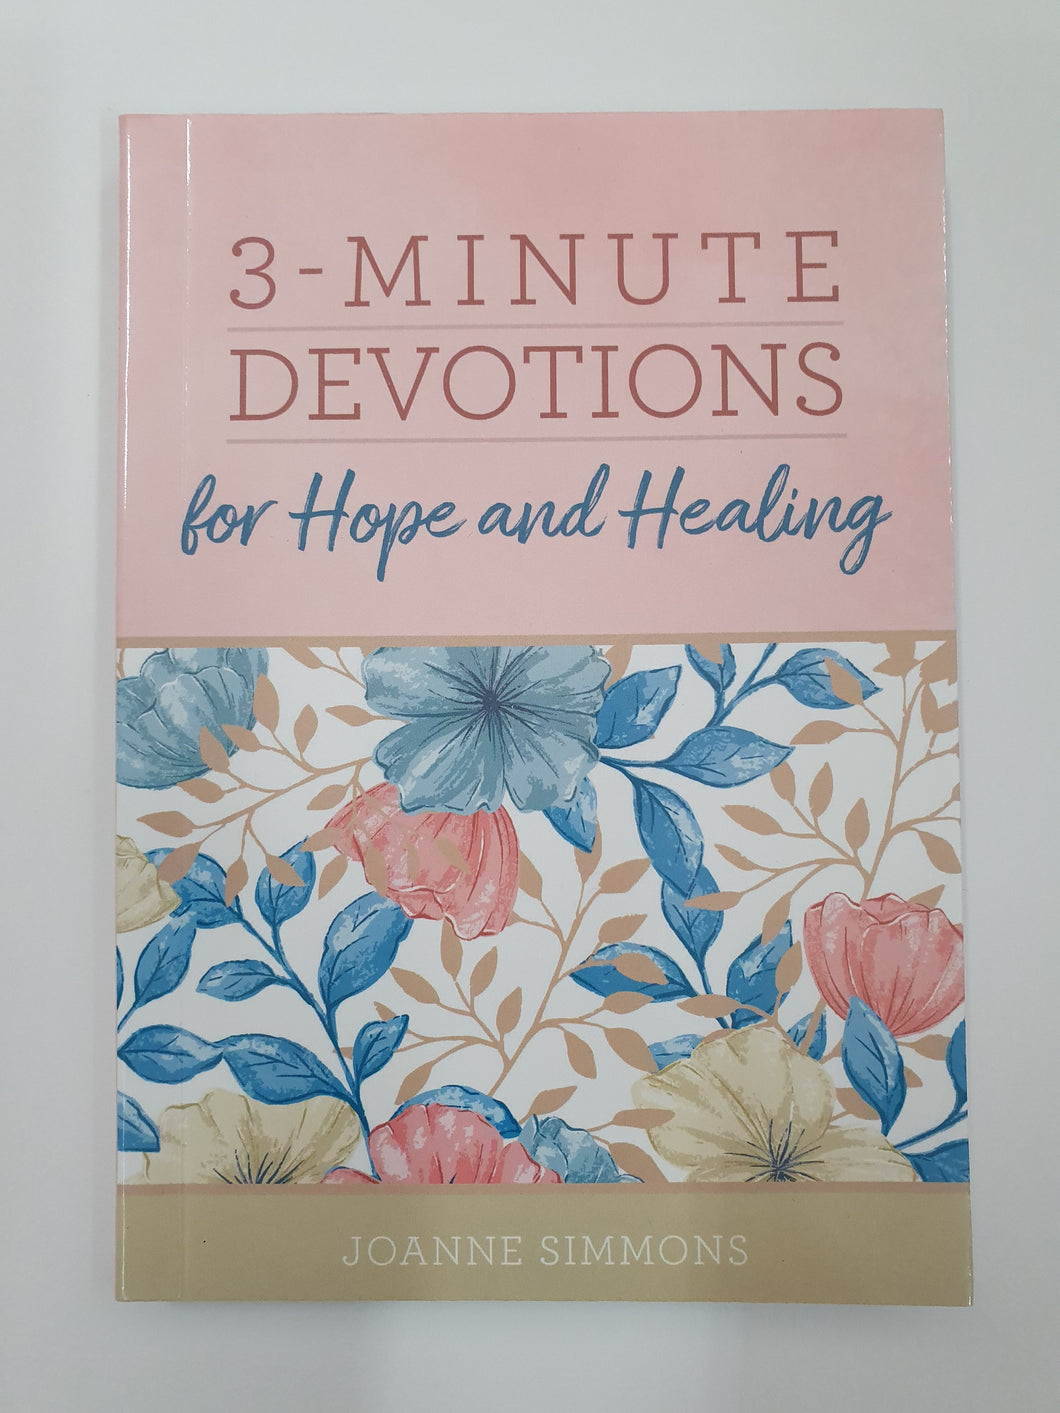 3 - Minute Devotions for Hope and Healing